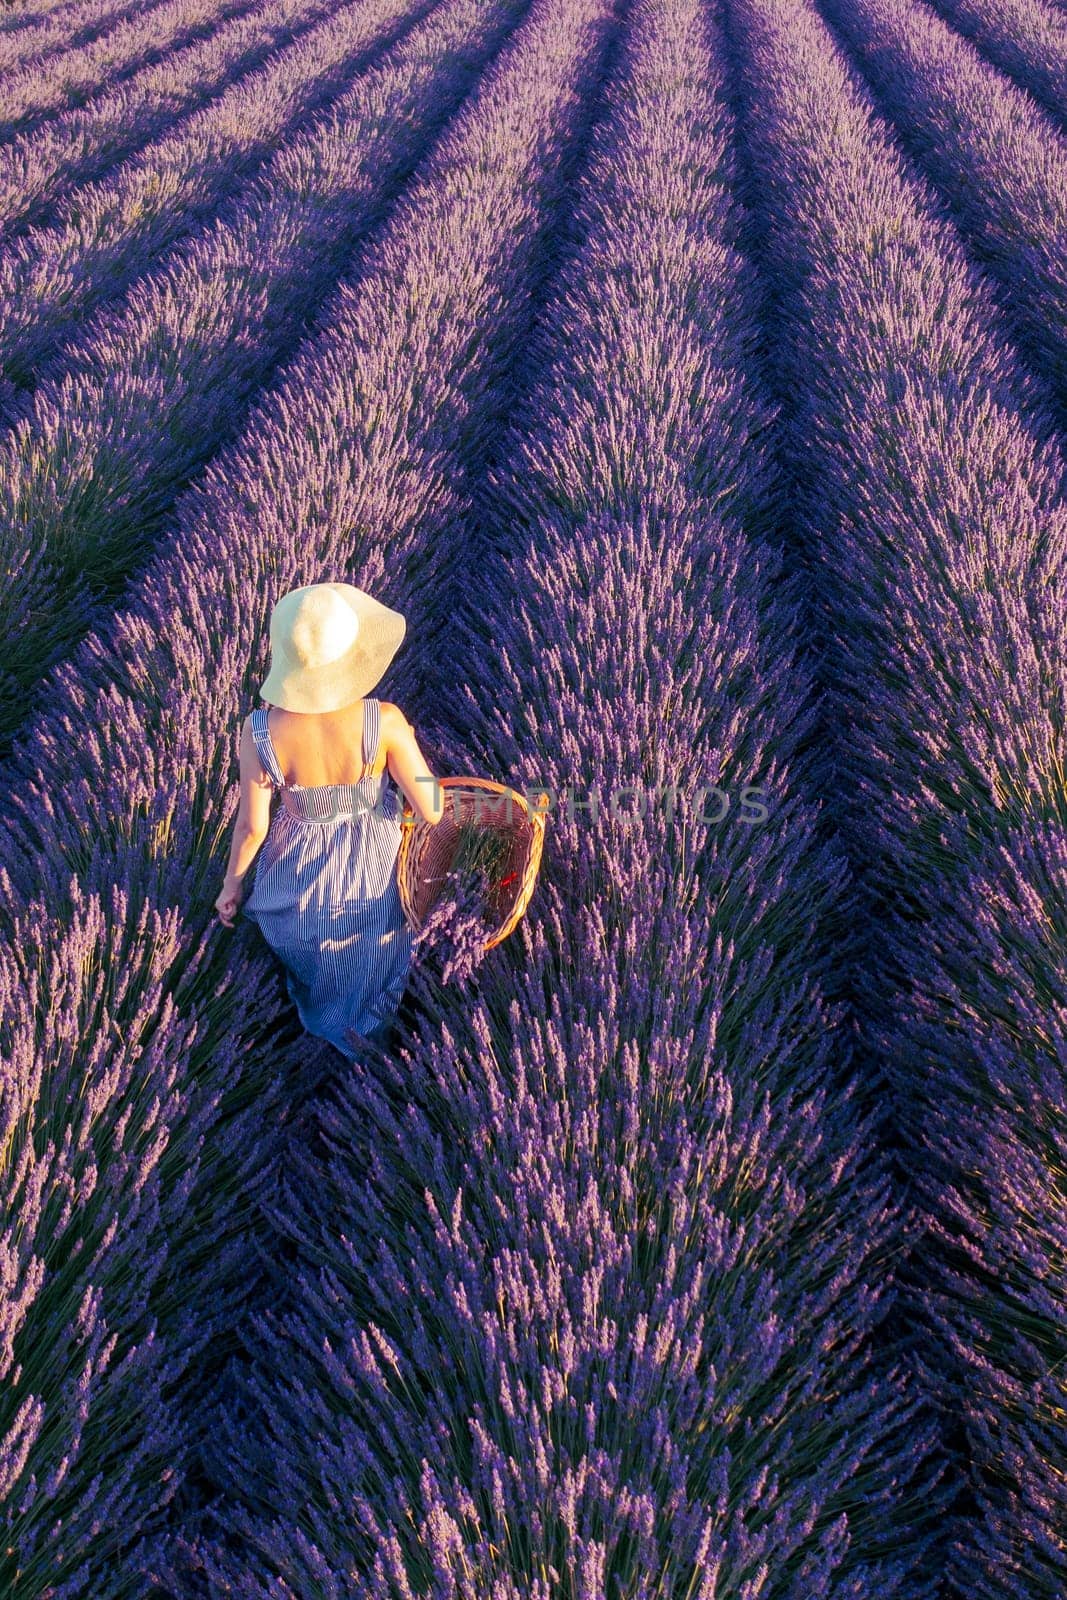 A woman in a hat and a beautiful dress collects lavender in a basket.